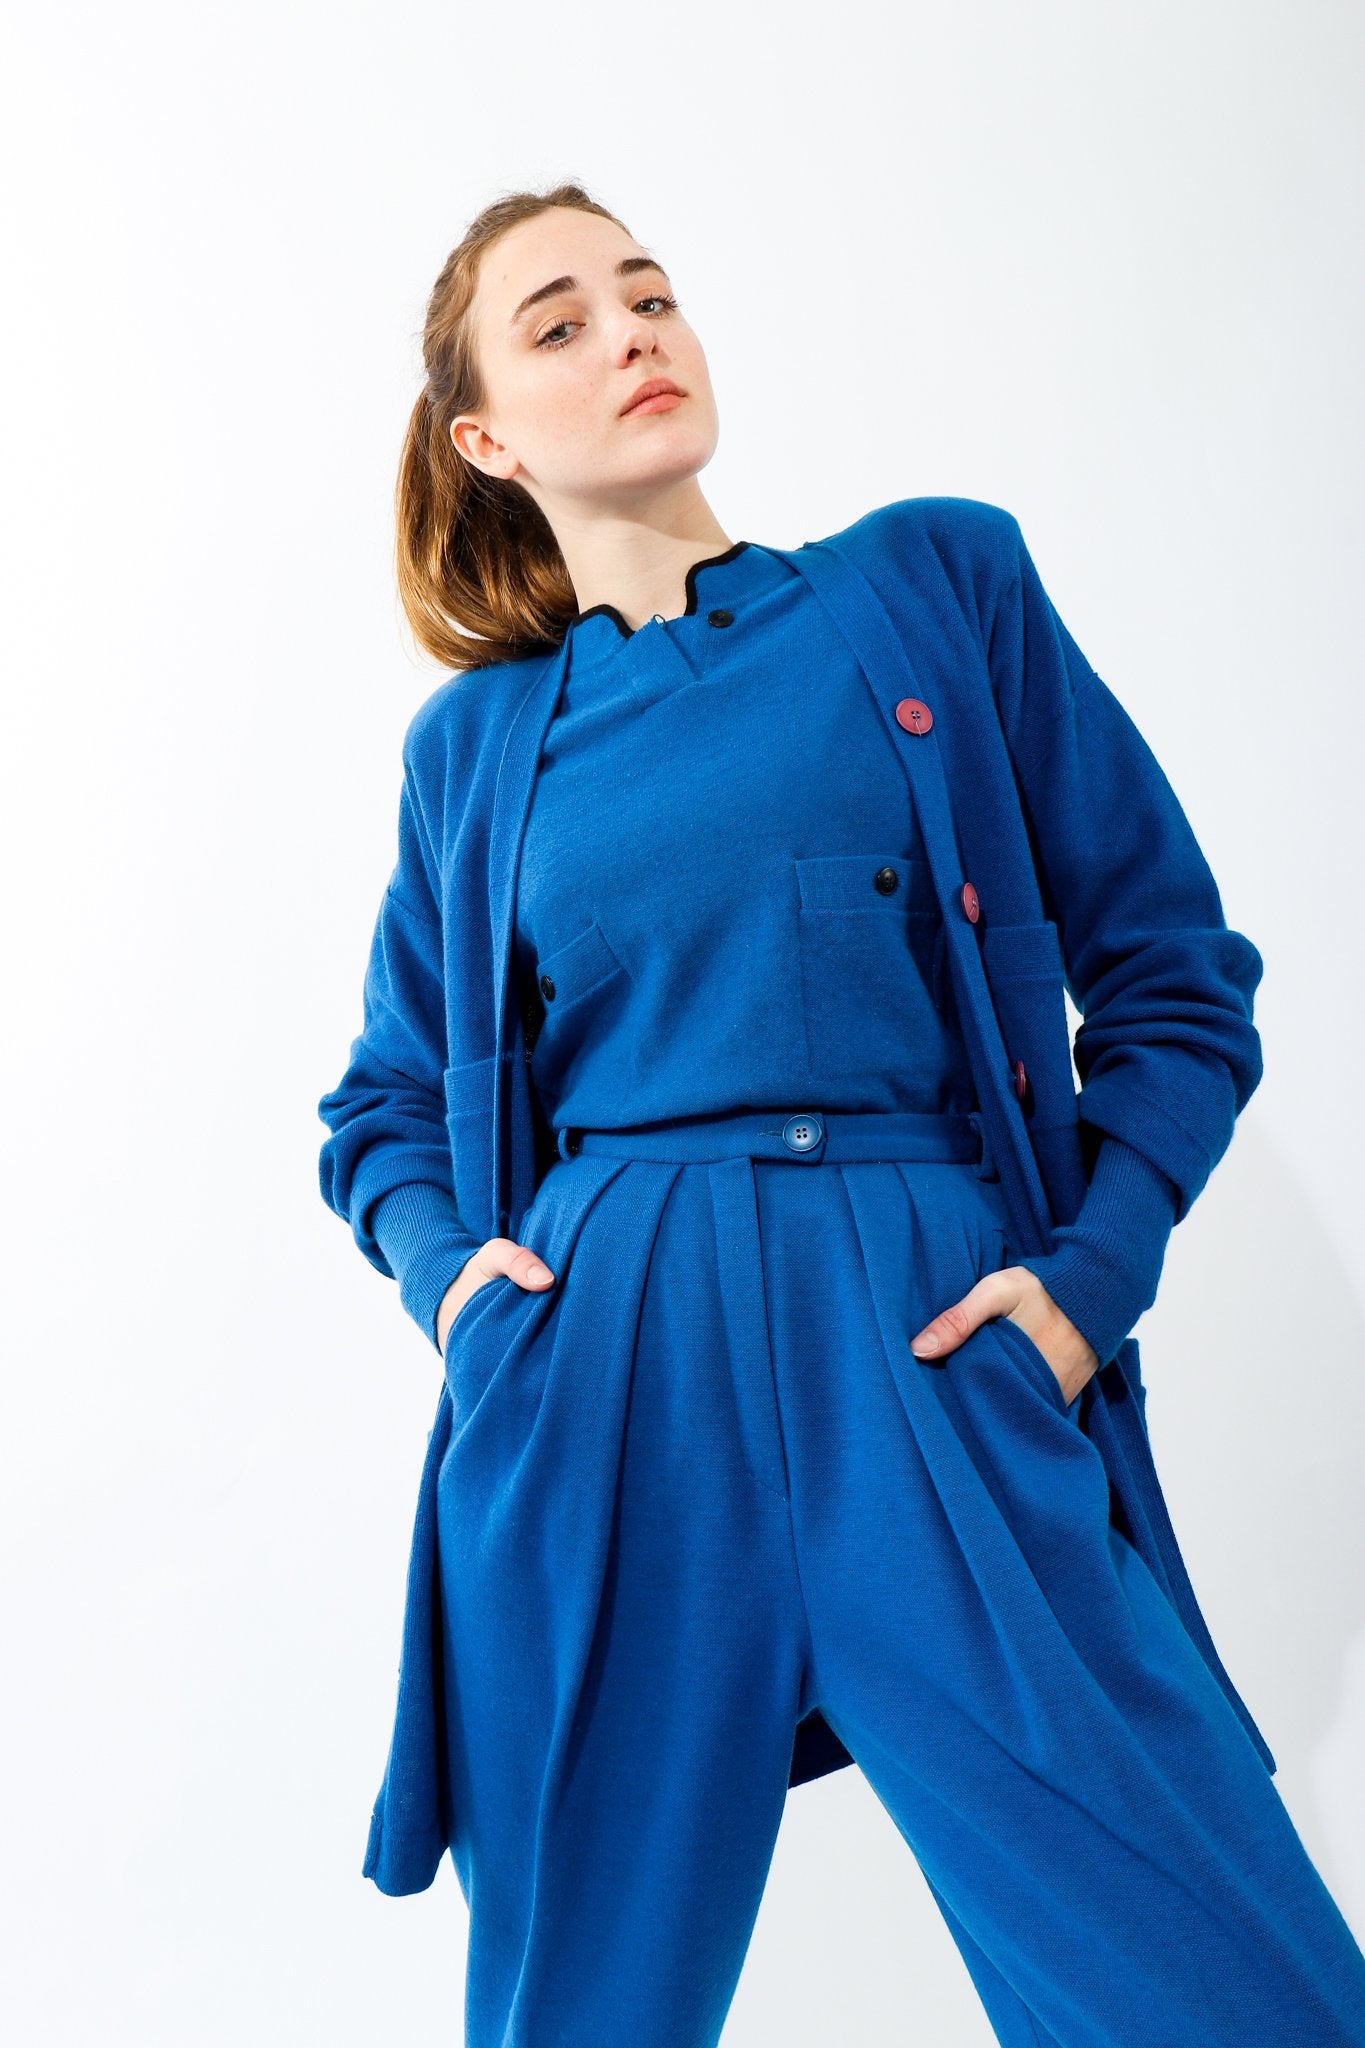 girl wearing Vintage Sonia Rykiel Blue Knit High Neck Sweater with matching cardigan and pant